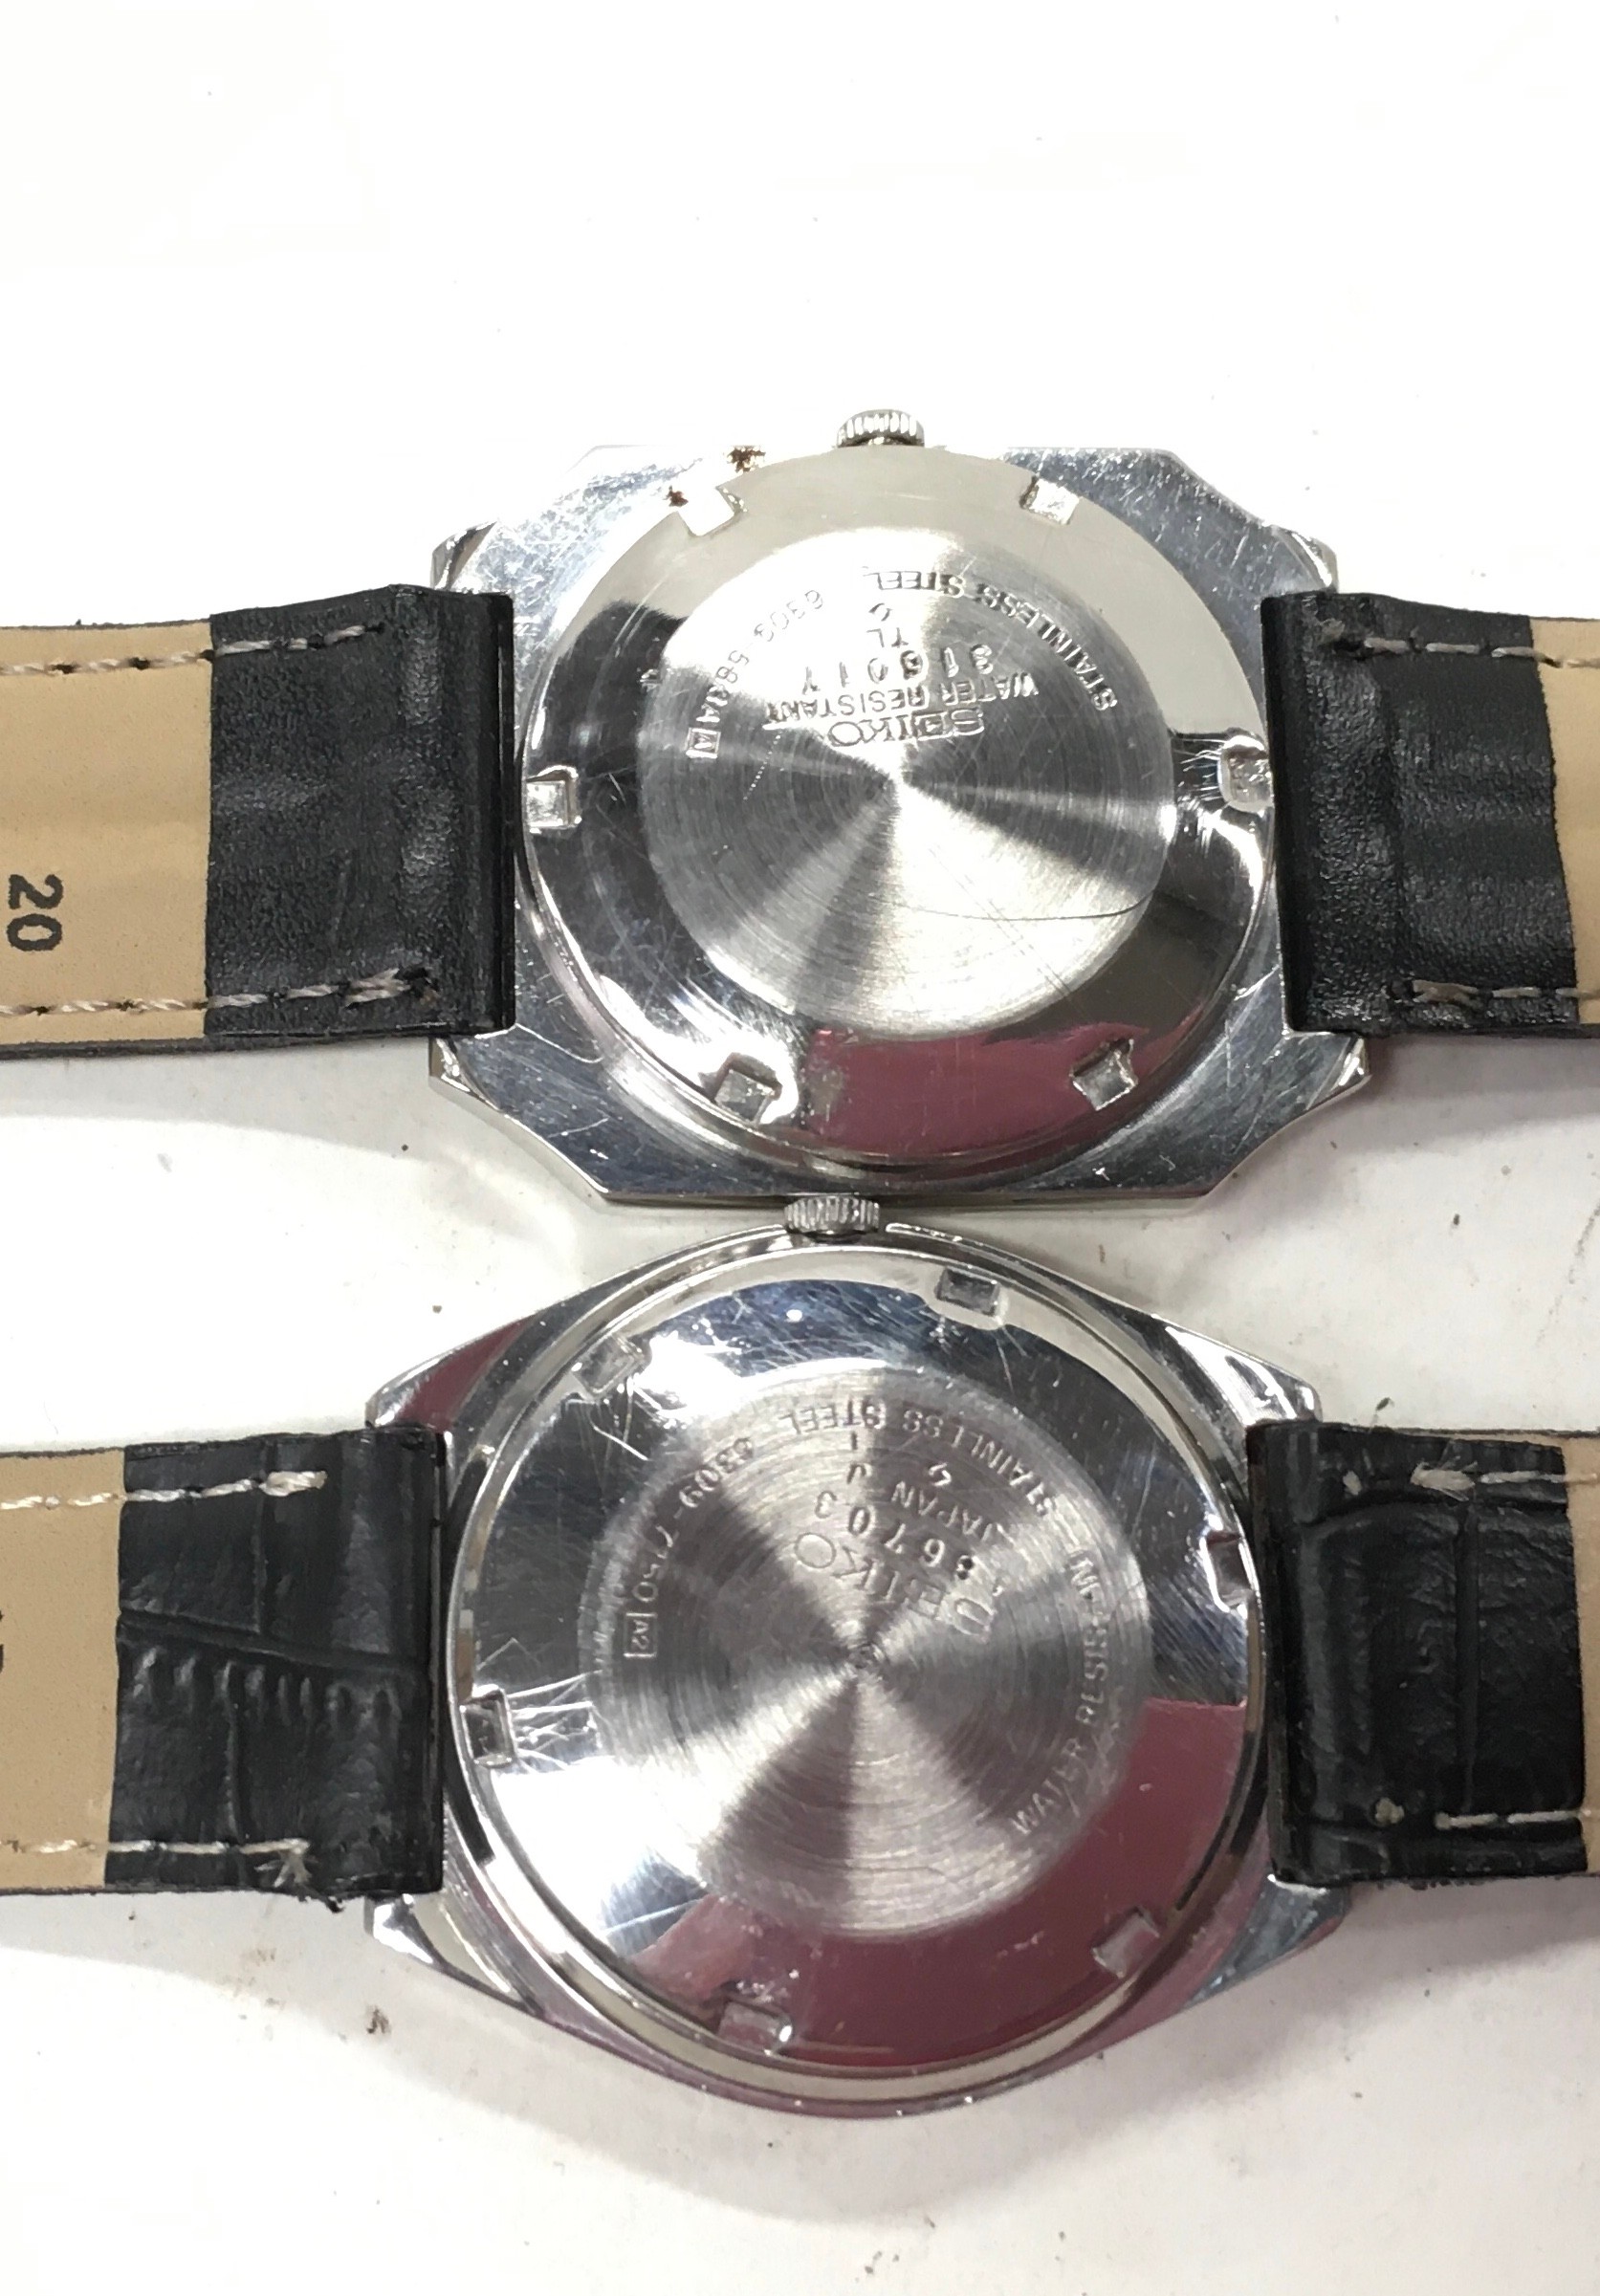 Collection of 4 vintage Seiko '5' gents watches. All seen working. 2 have aftermarket dials. - Image 6 of 7